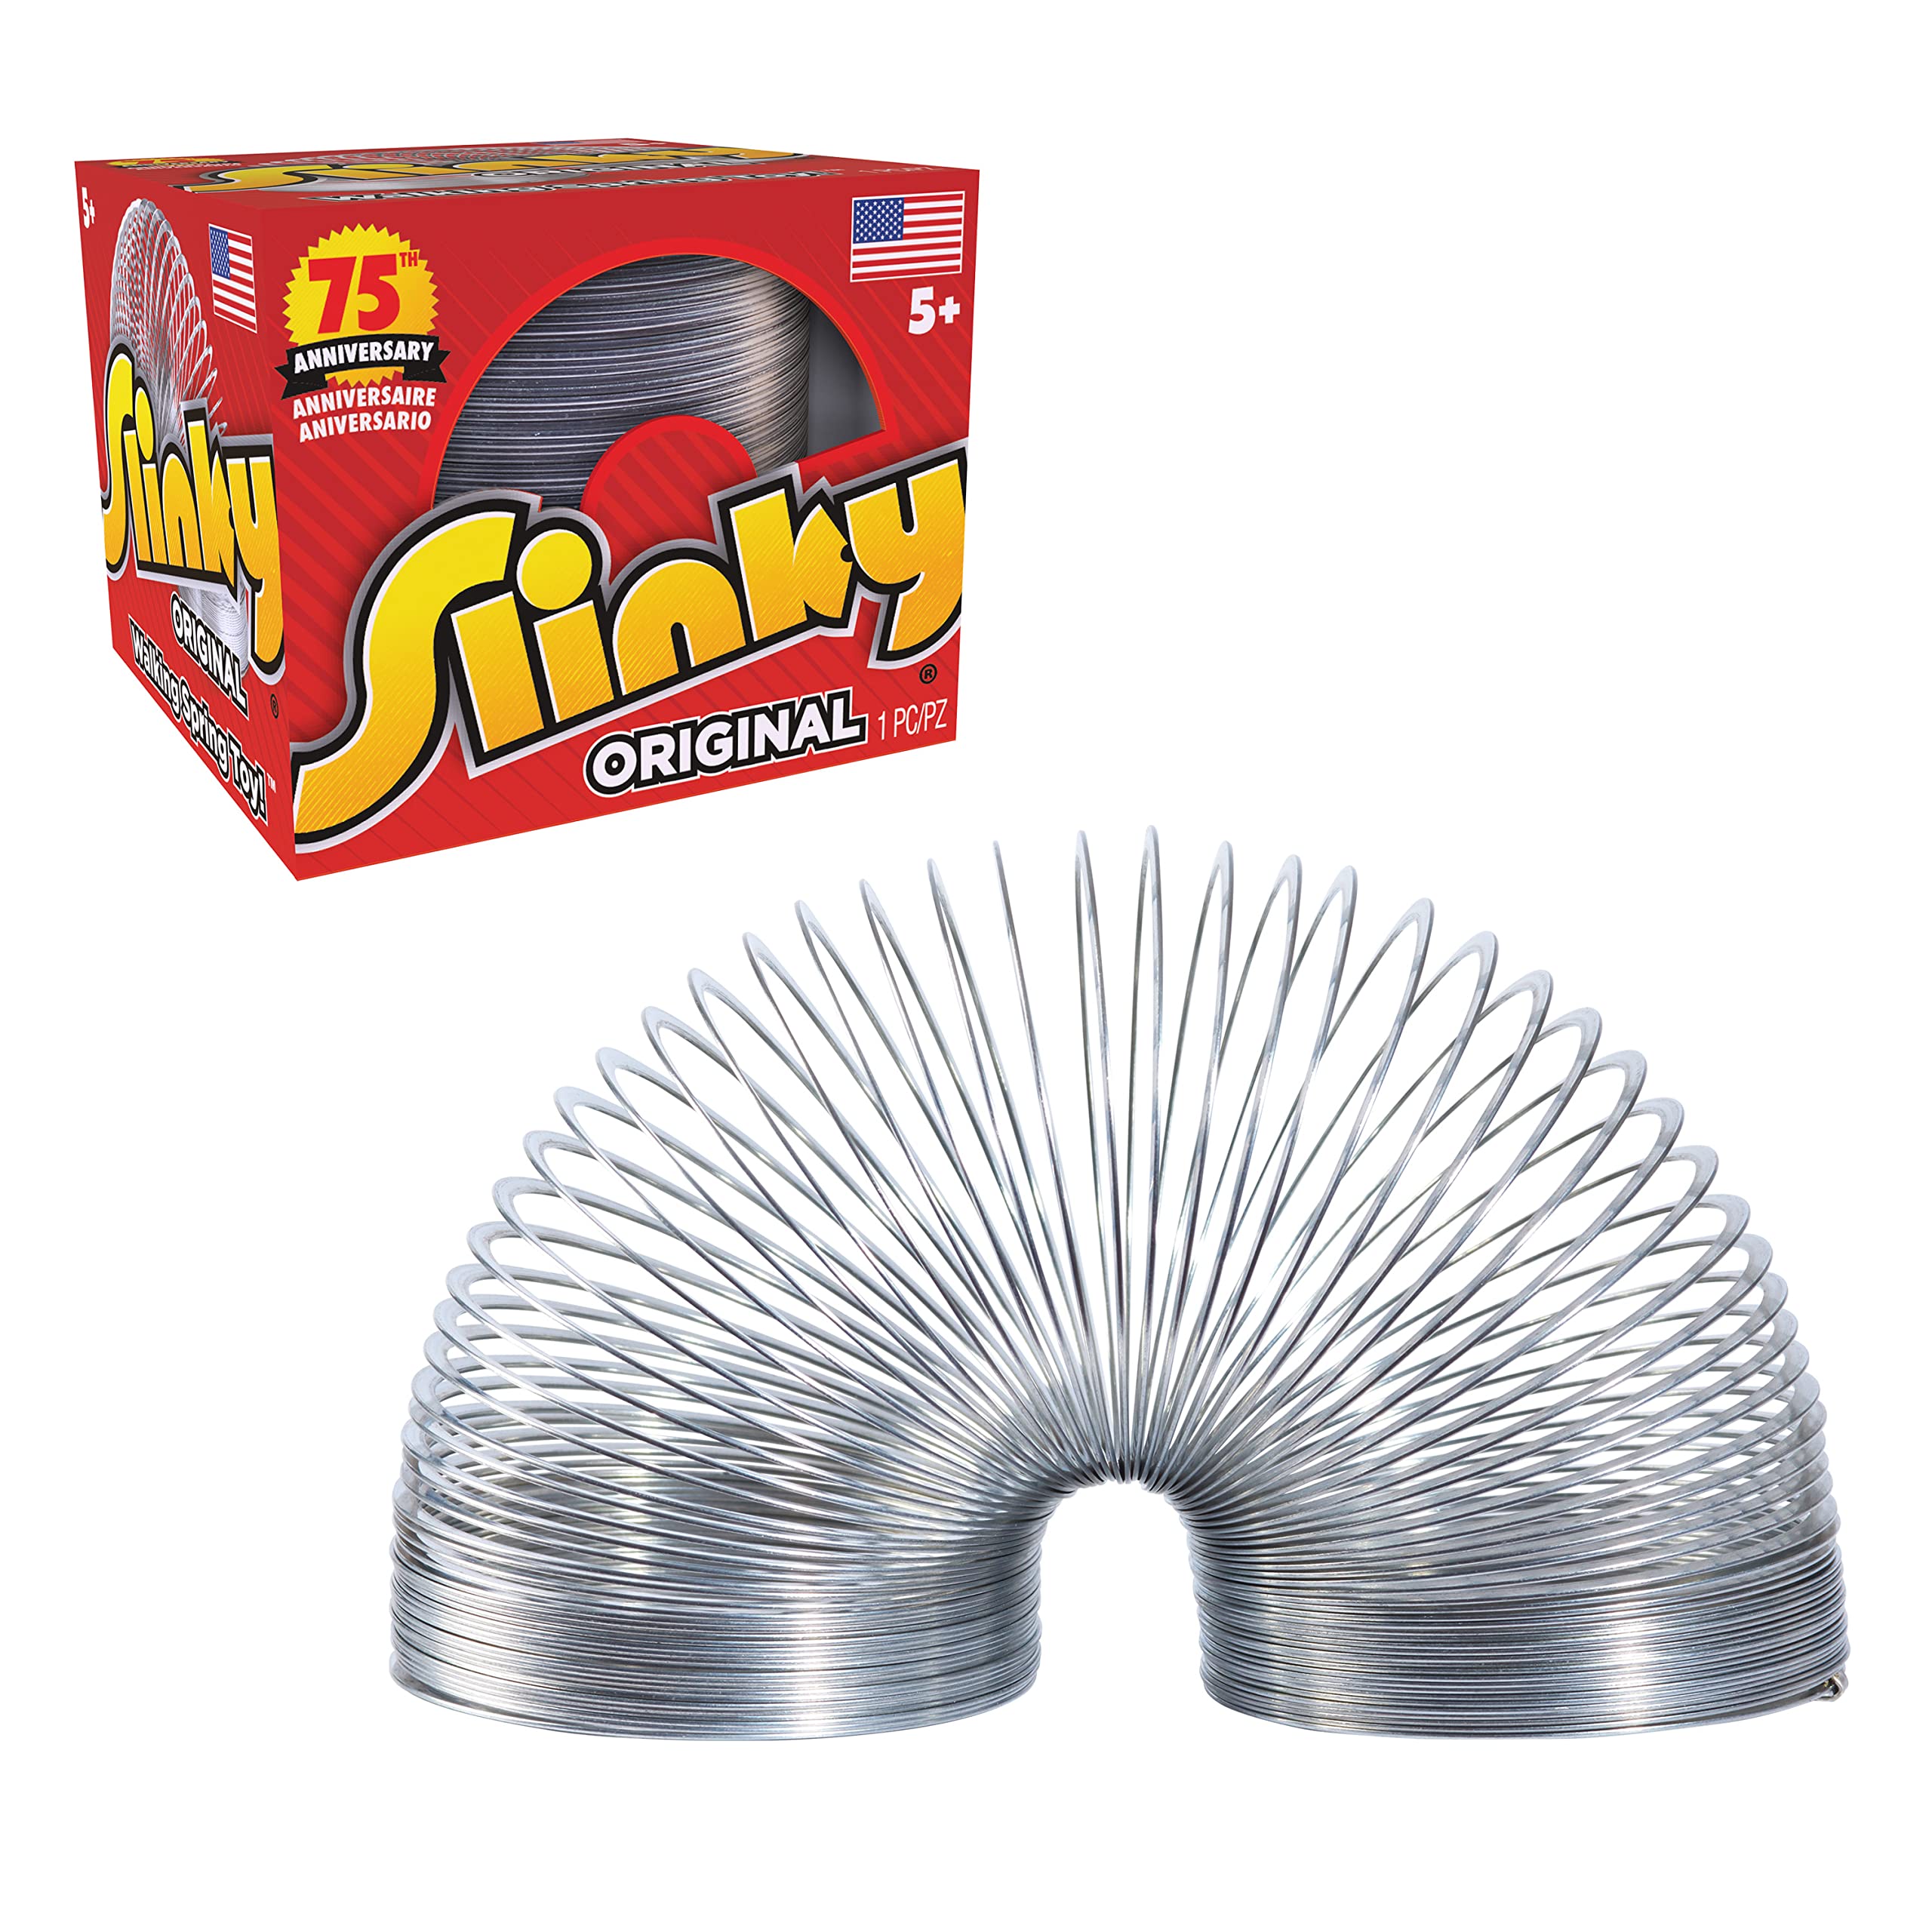 The Original Slinky Walking Spring Toy, Basket Stuffers, Metal Slinky, Fidget Toys, Party Favors and Gifts, Kids Toys for Ages 5 Up, Small Gifts by Just Play